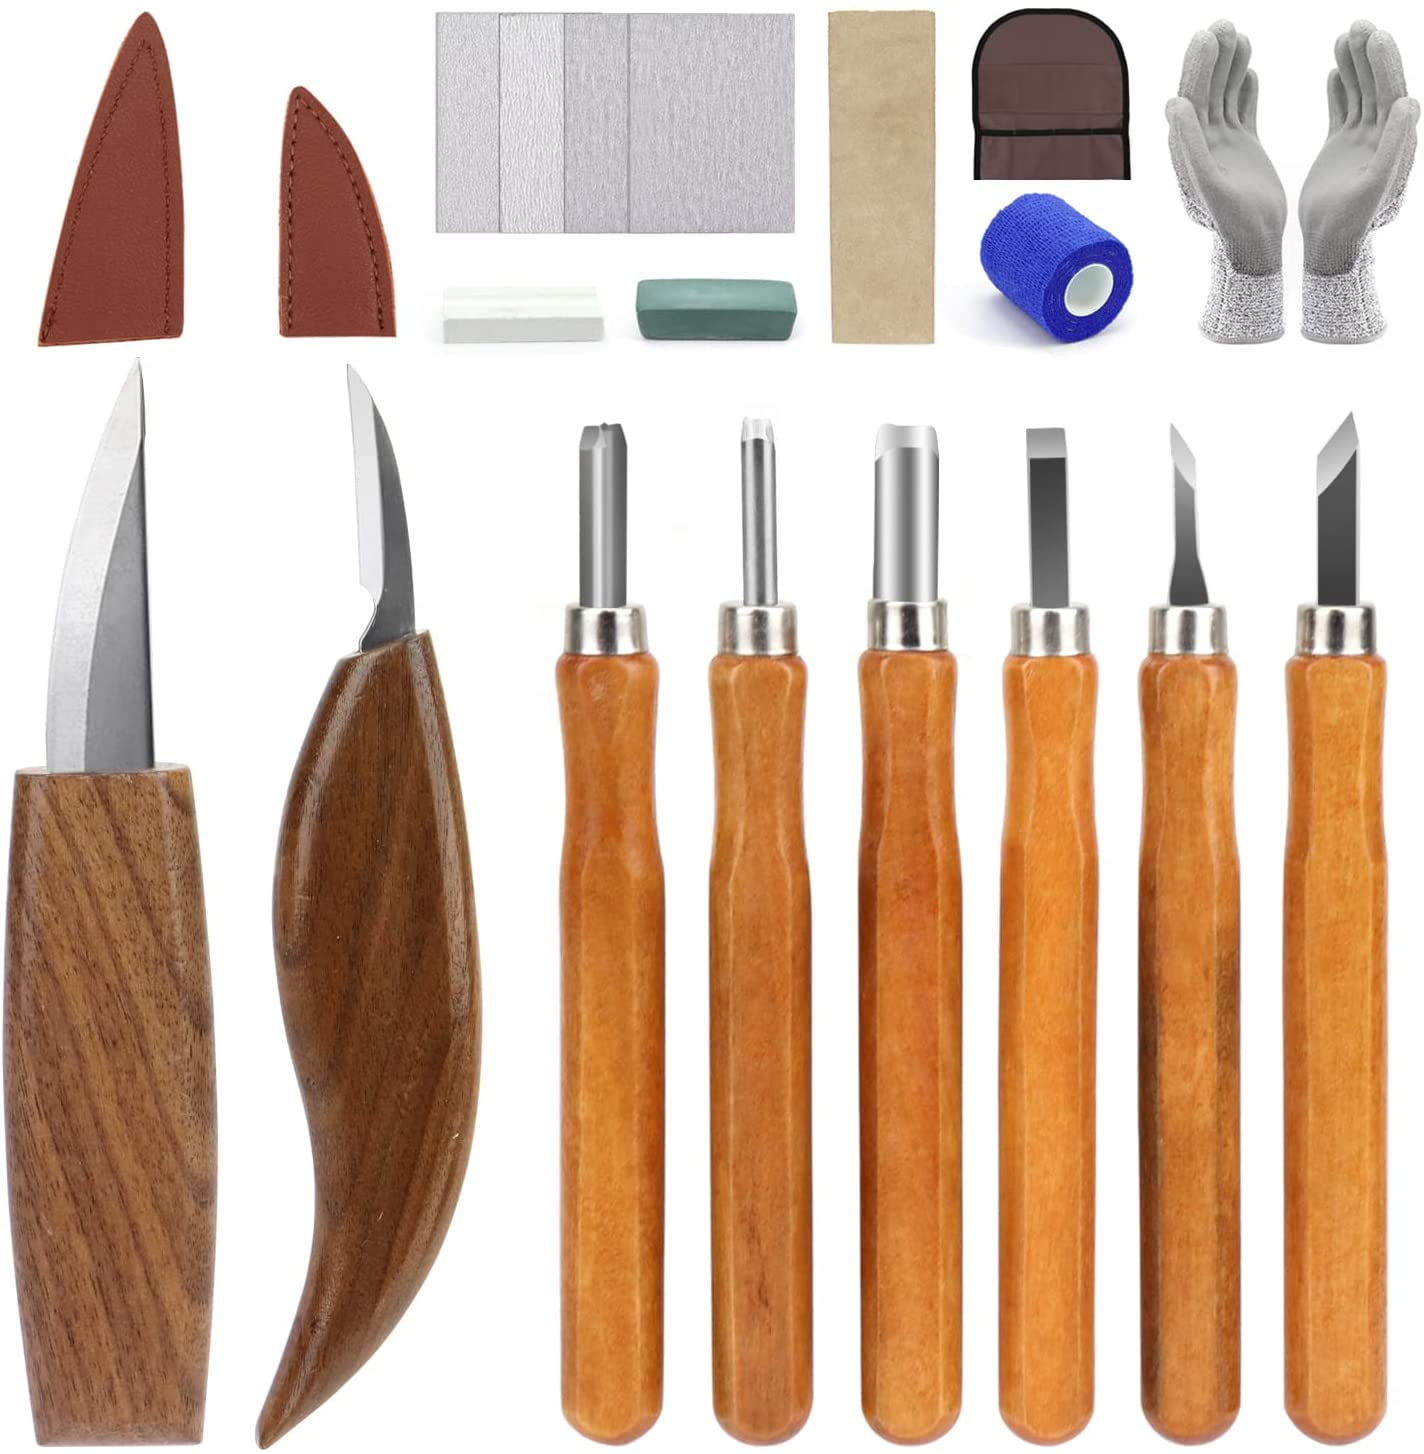 19 Pcs Wood Carving Tools Kit Knifies Set Spoon Carving Blanks Wood  Whittling Kit for Beginners Kids Adults Woodworking DIY - AliExpress